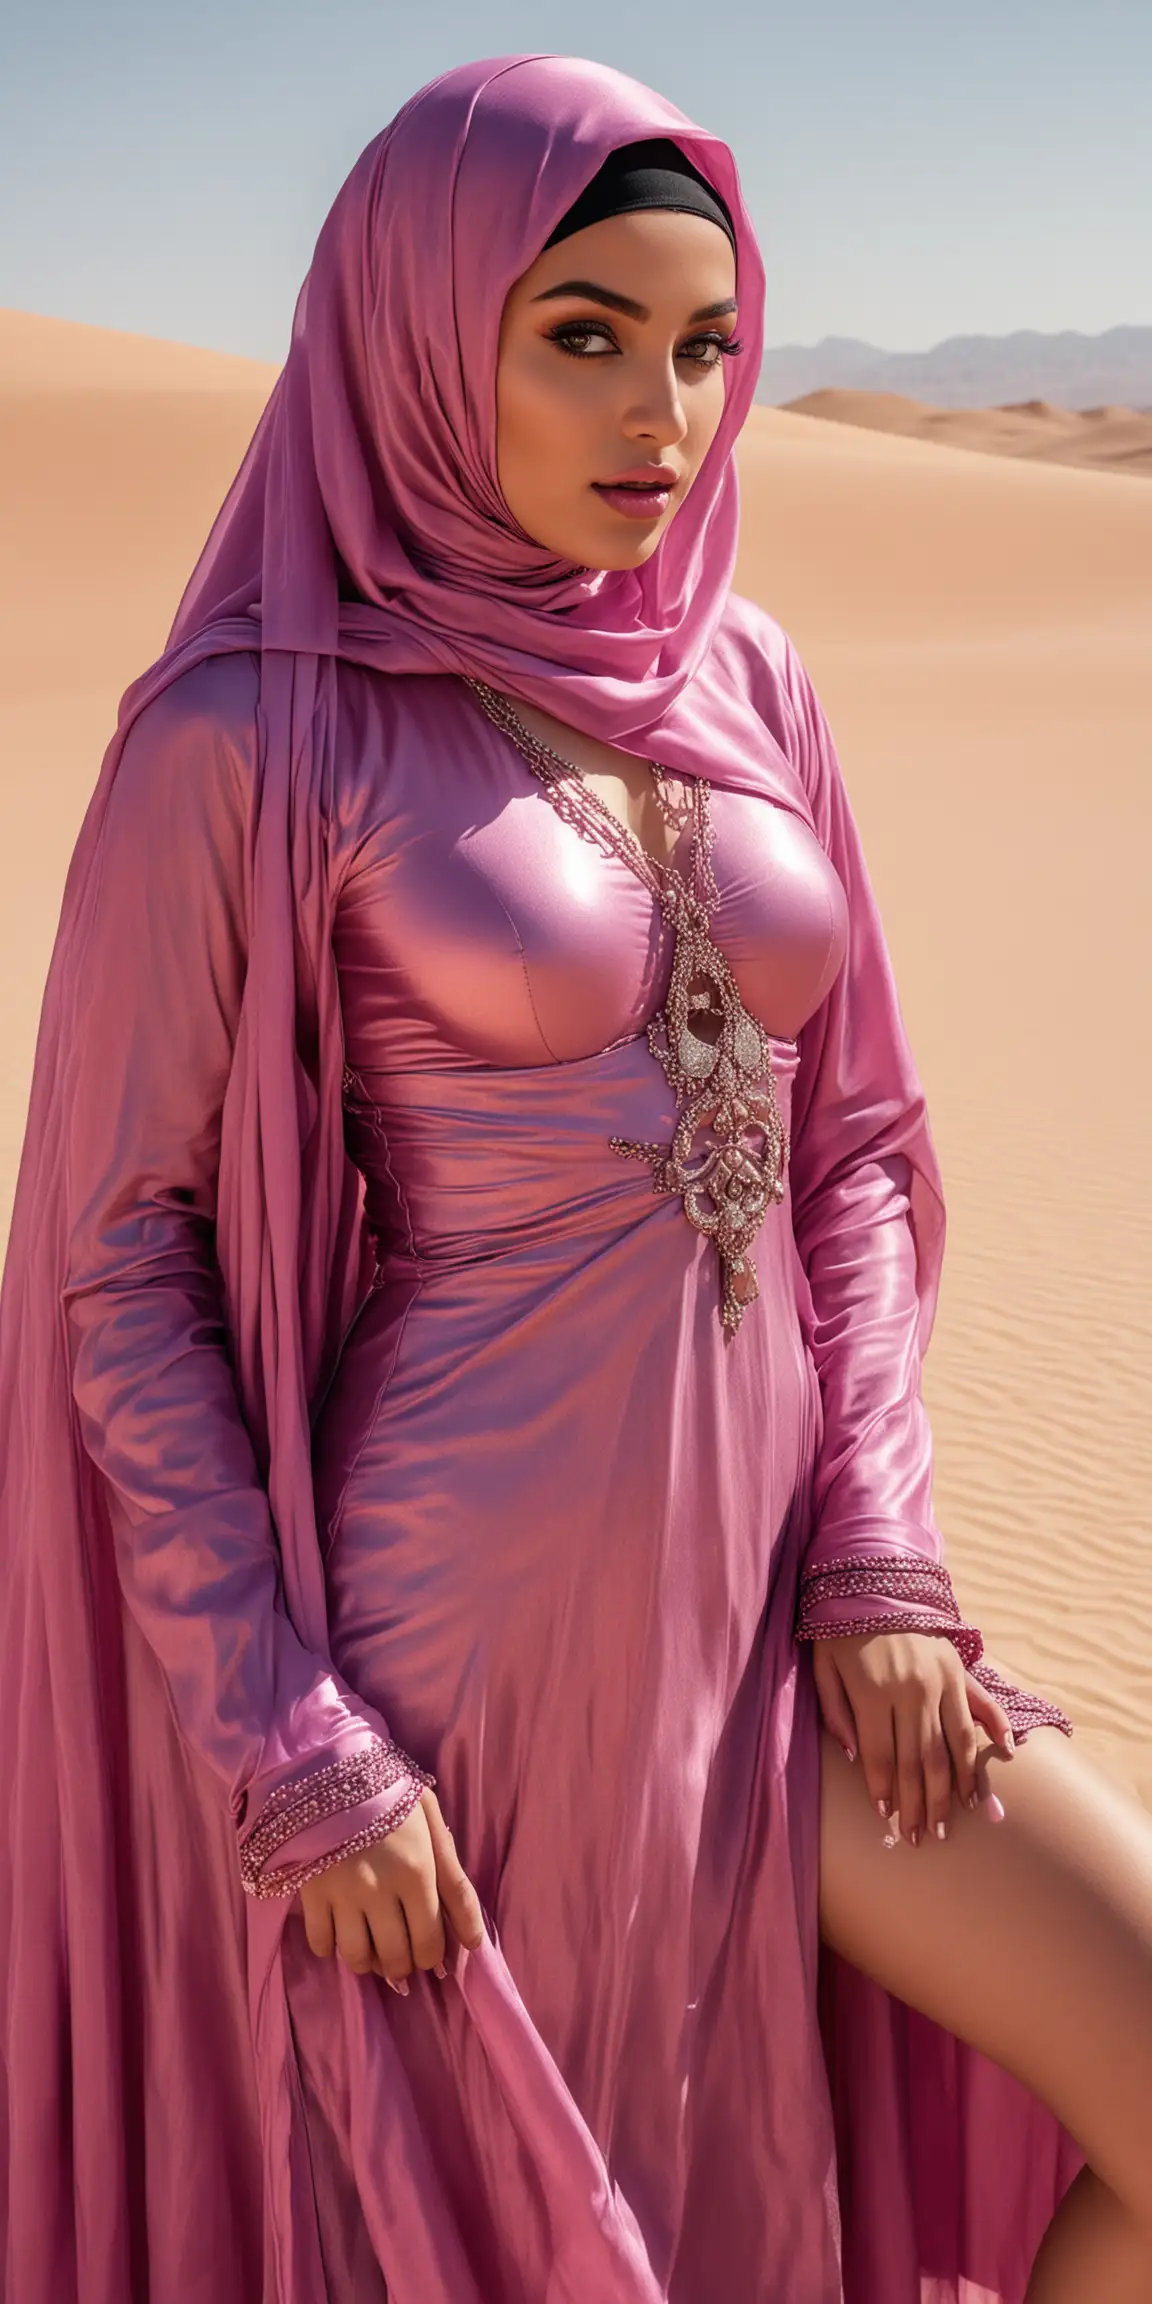 Remote luxury desert oasis. Newlywed, Fair-skinned, shy, big-breasted Niqabi Arab Muslimah in heavy gaudy bridal lipstick makeup & jewellery and 5” patent leather Louboutin heels is wearing a magenta shiny lustrous metallic chiffon skimpy-bikini with a metallic niqab long, loose, drapey fabric *hides her face*.